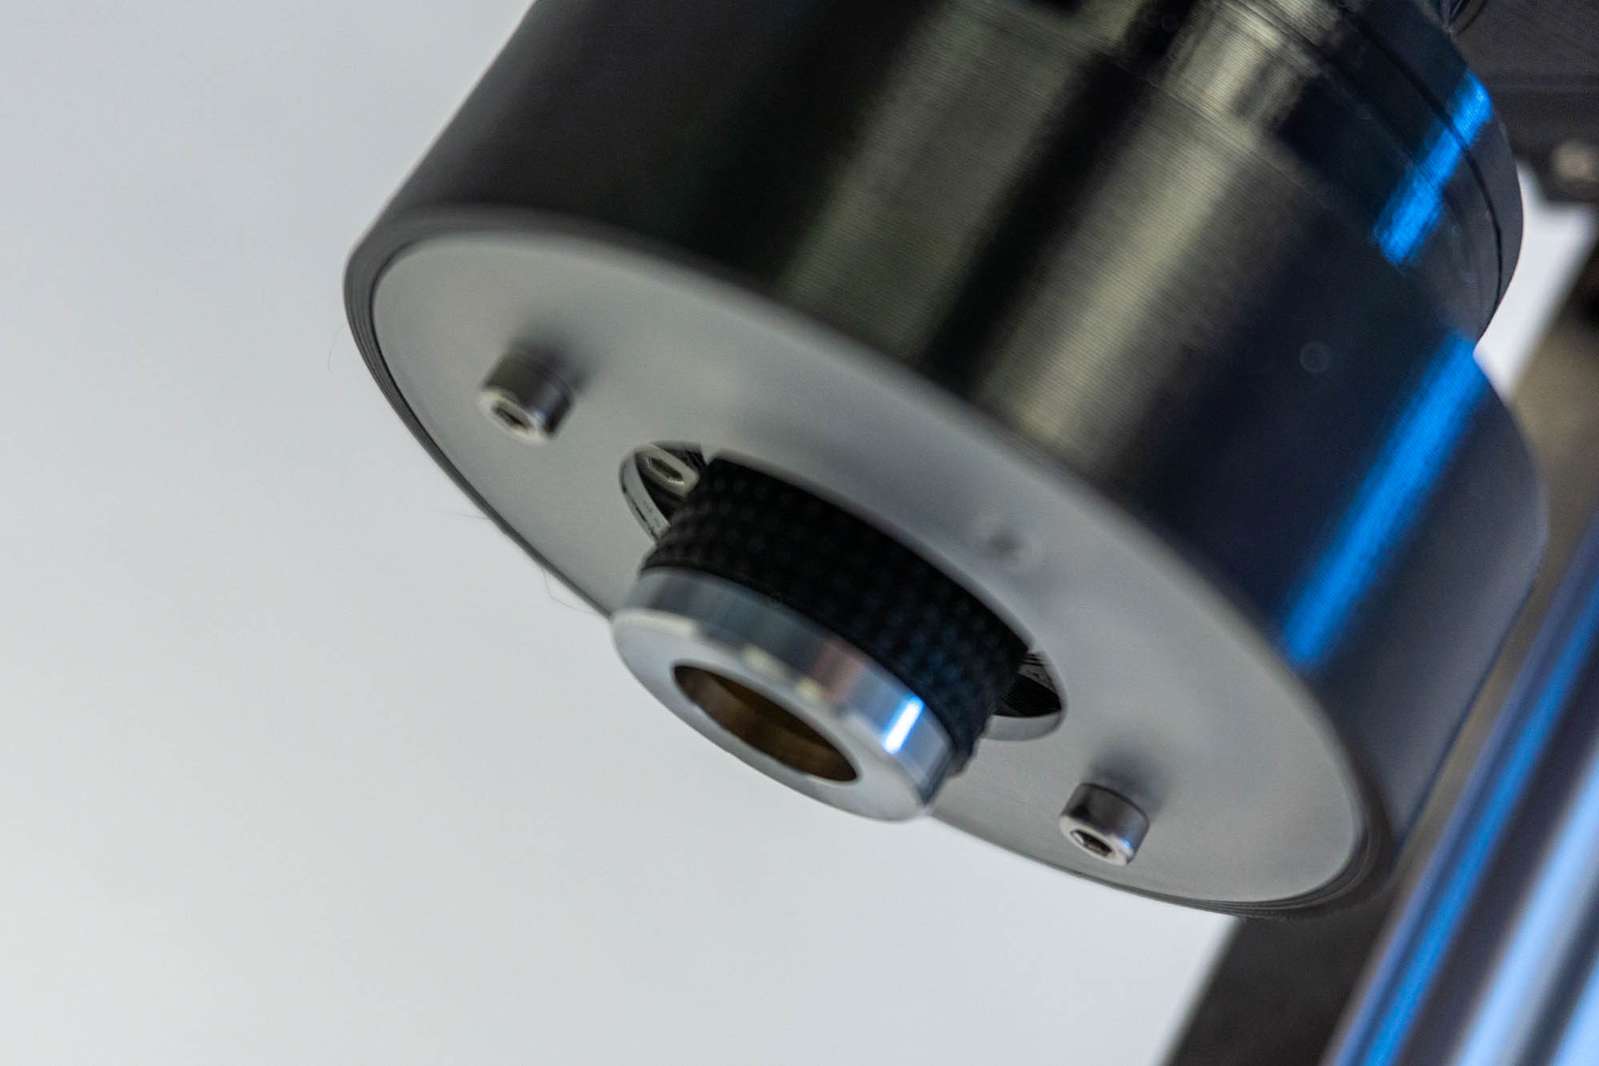 RGB ringlight mounted around the microscope objective with an additional diffusor